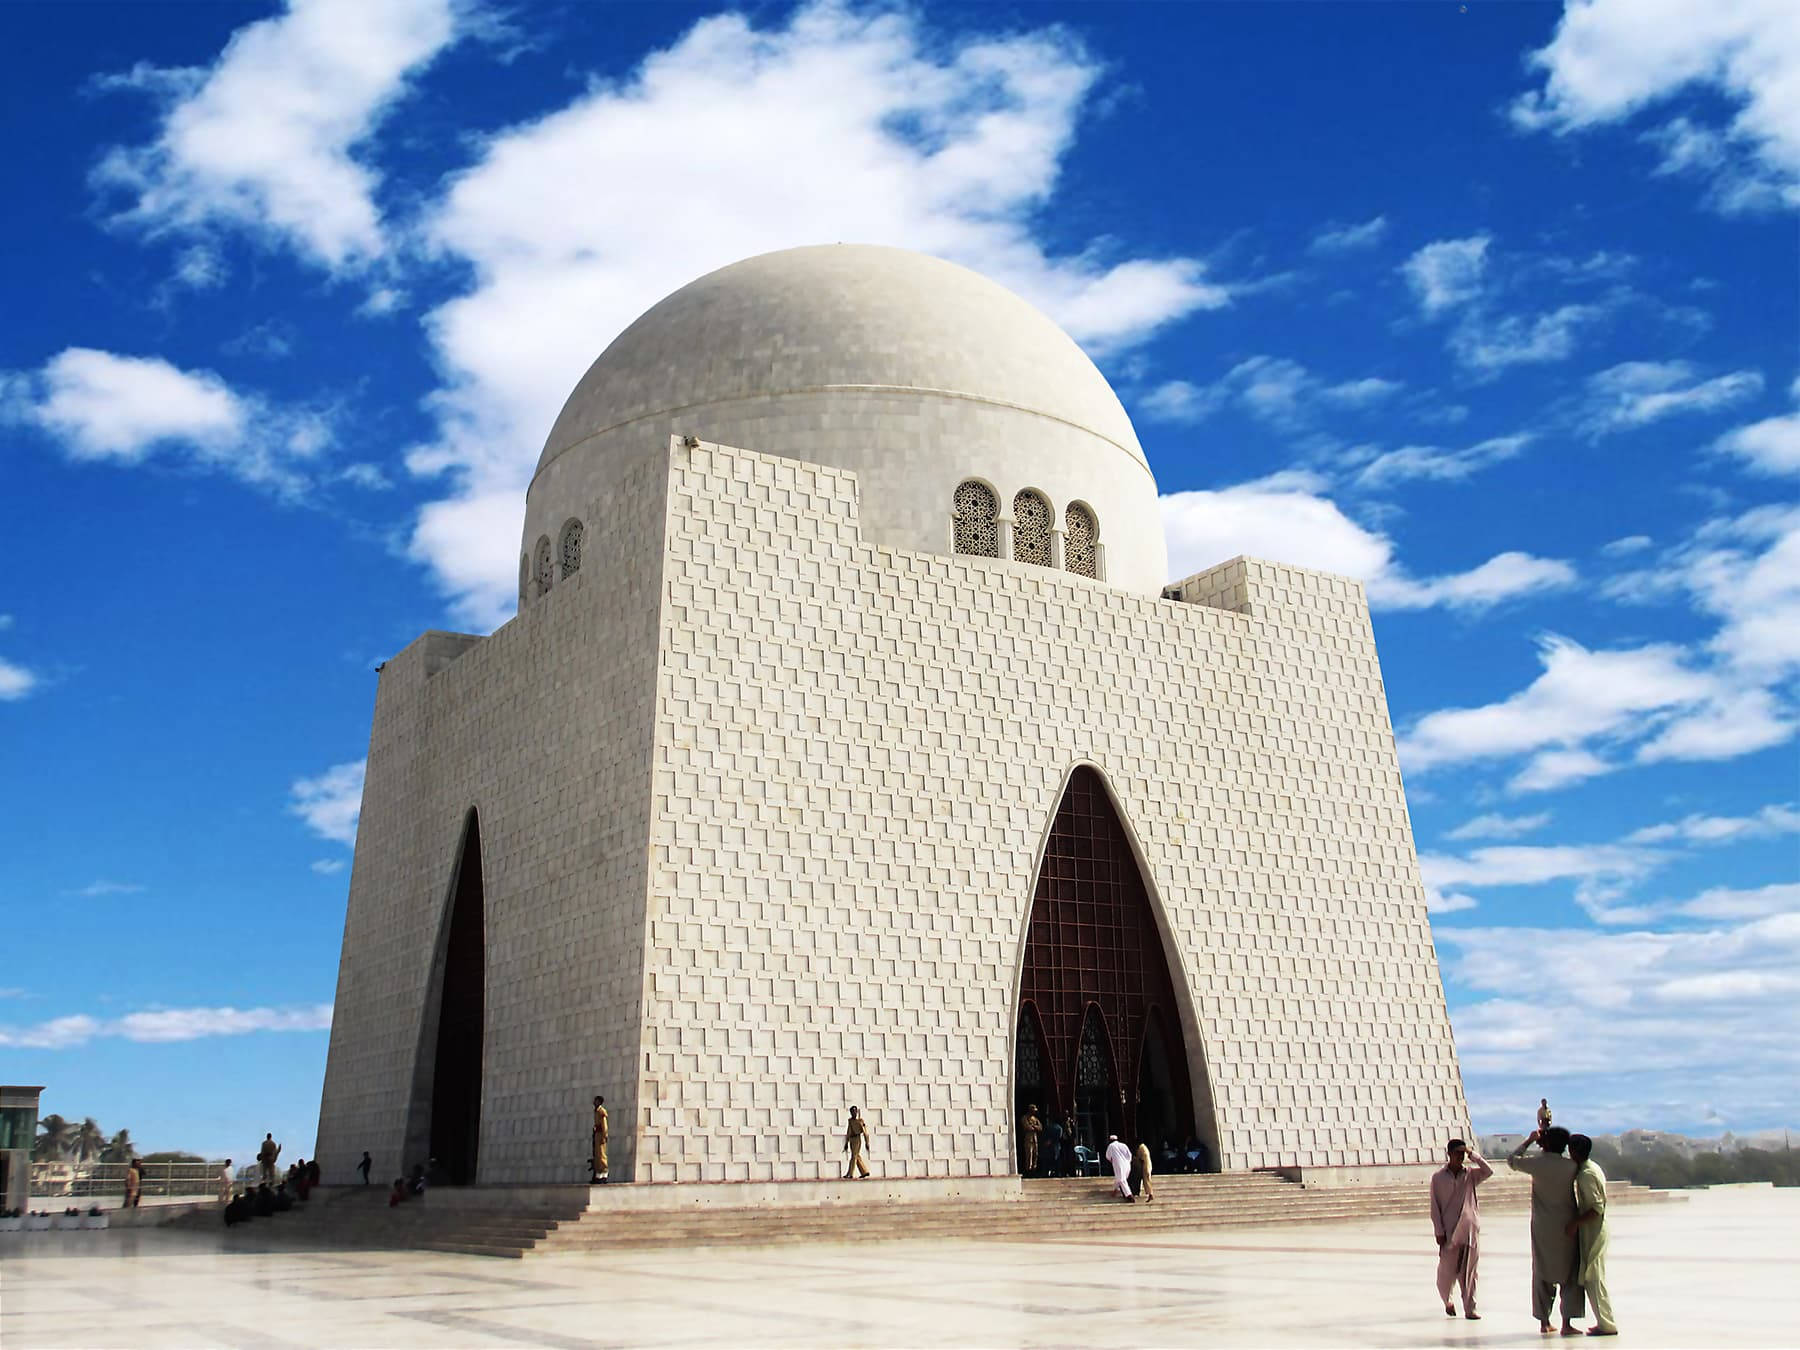 Karachiquaid's Mausoleum (in The Context Of Computer Or Mobile Wallpaper) Would Be Translated To 